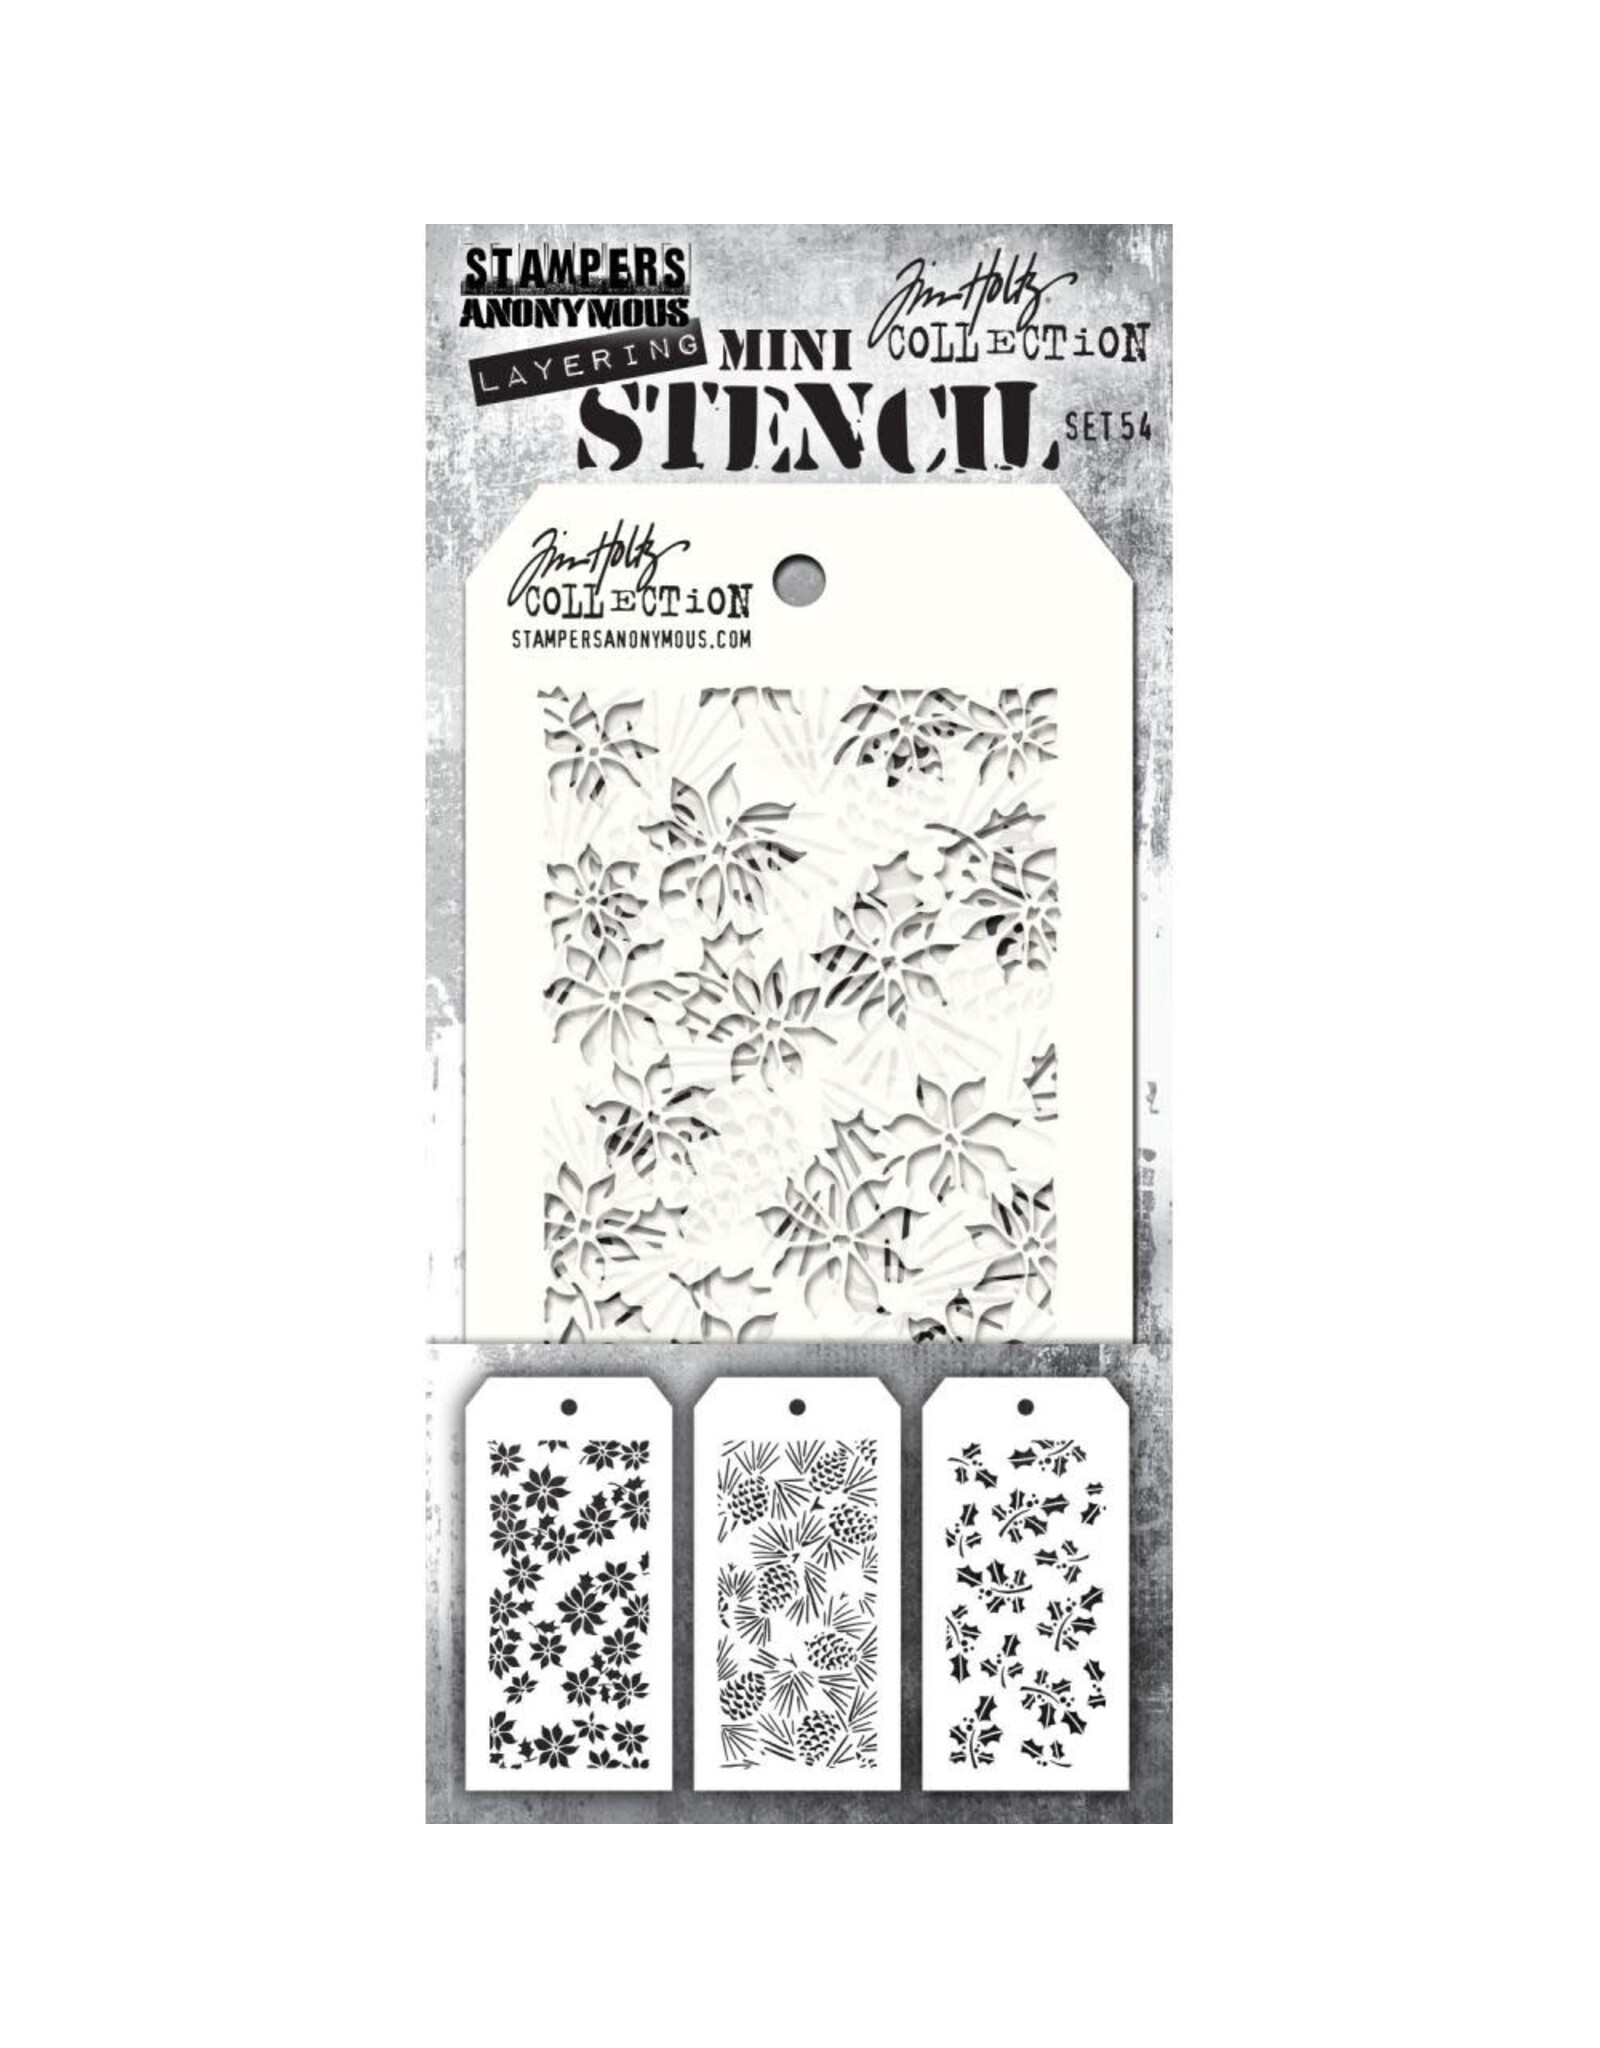 STAMPERS ANONYMOUS STAMPERS ANONYMOUS TIM HOLTZ MINI LAYERING STENCIL SET 54 3PK